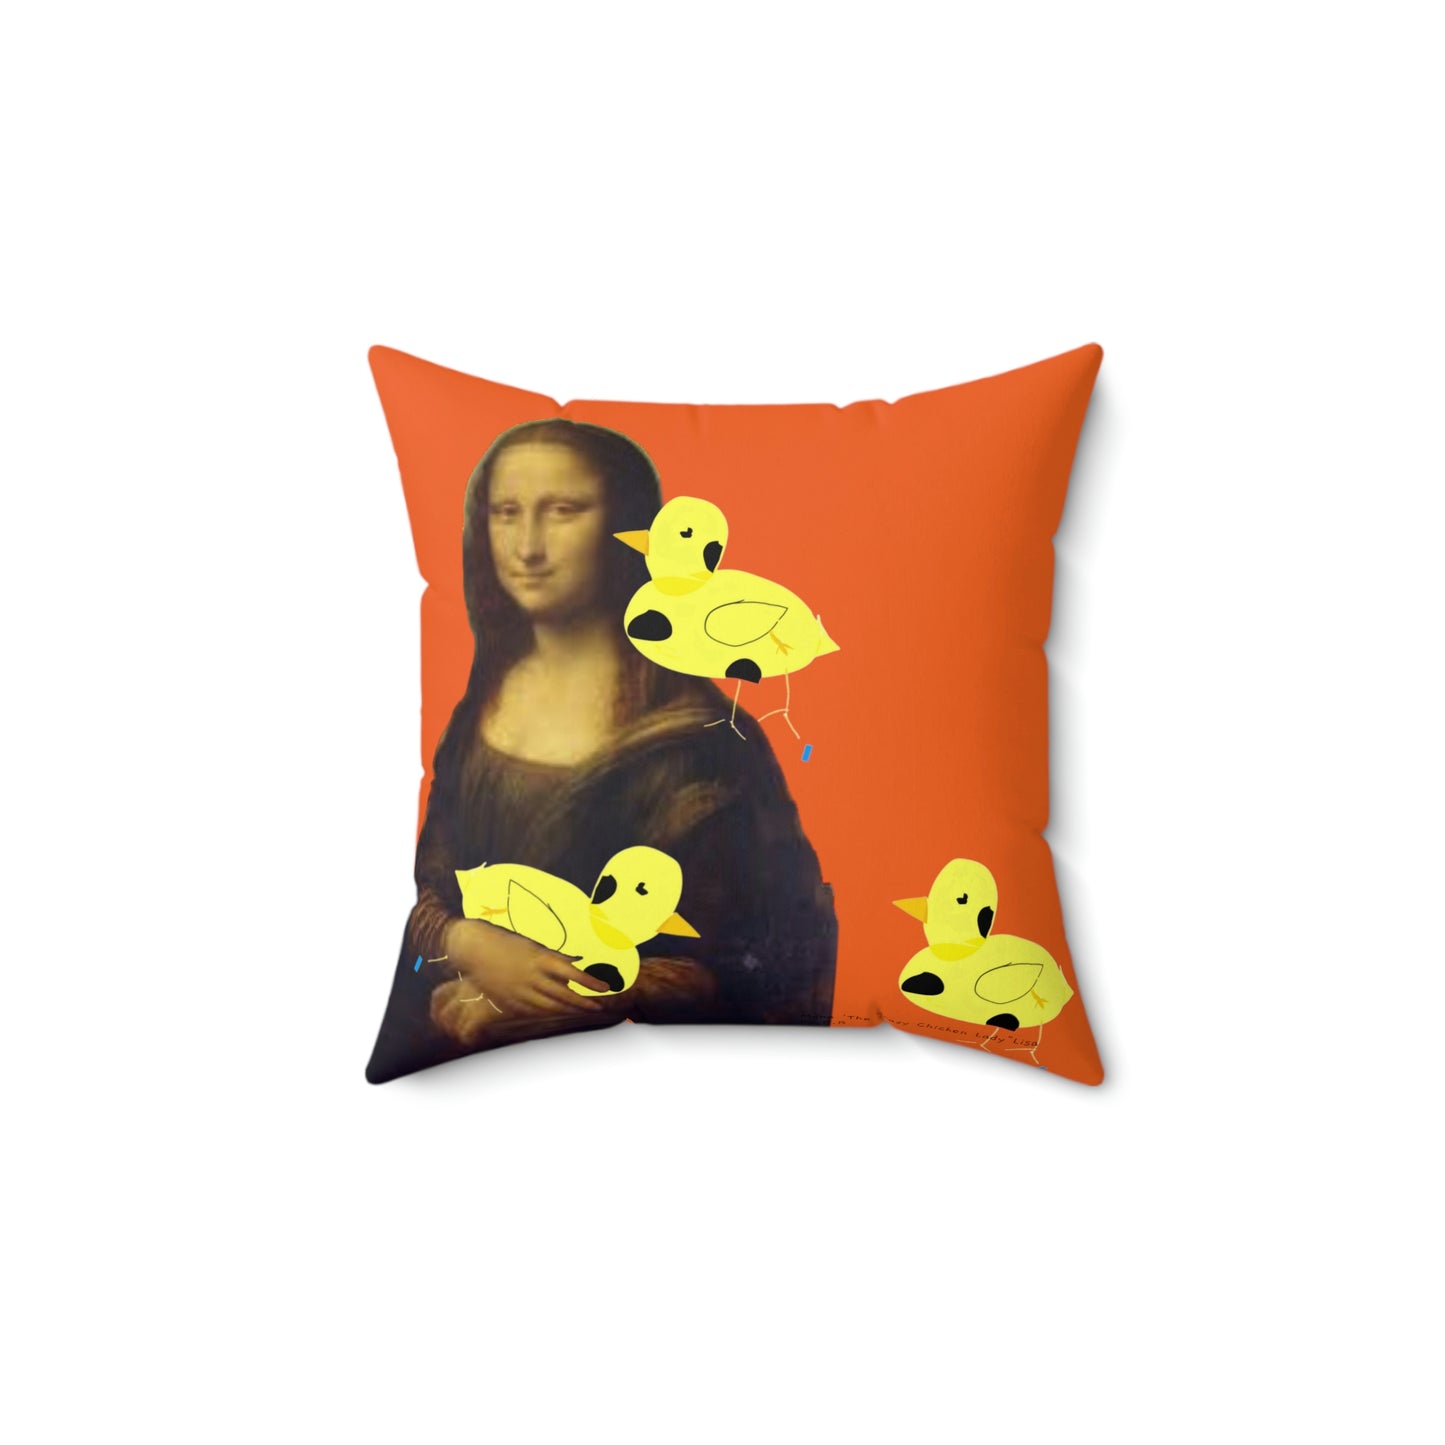 Spun Polyester Square Pillow with 'Mona The Crazy Chicken Lady' Lisa by D.B. print